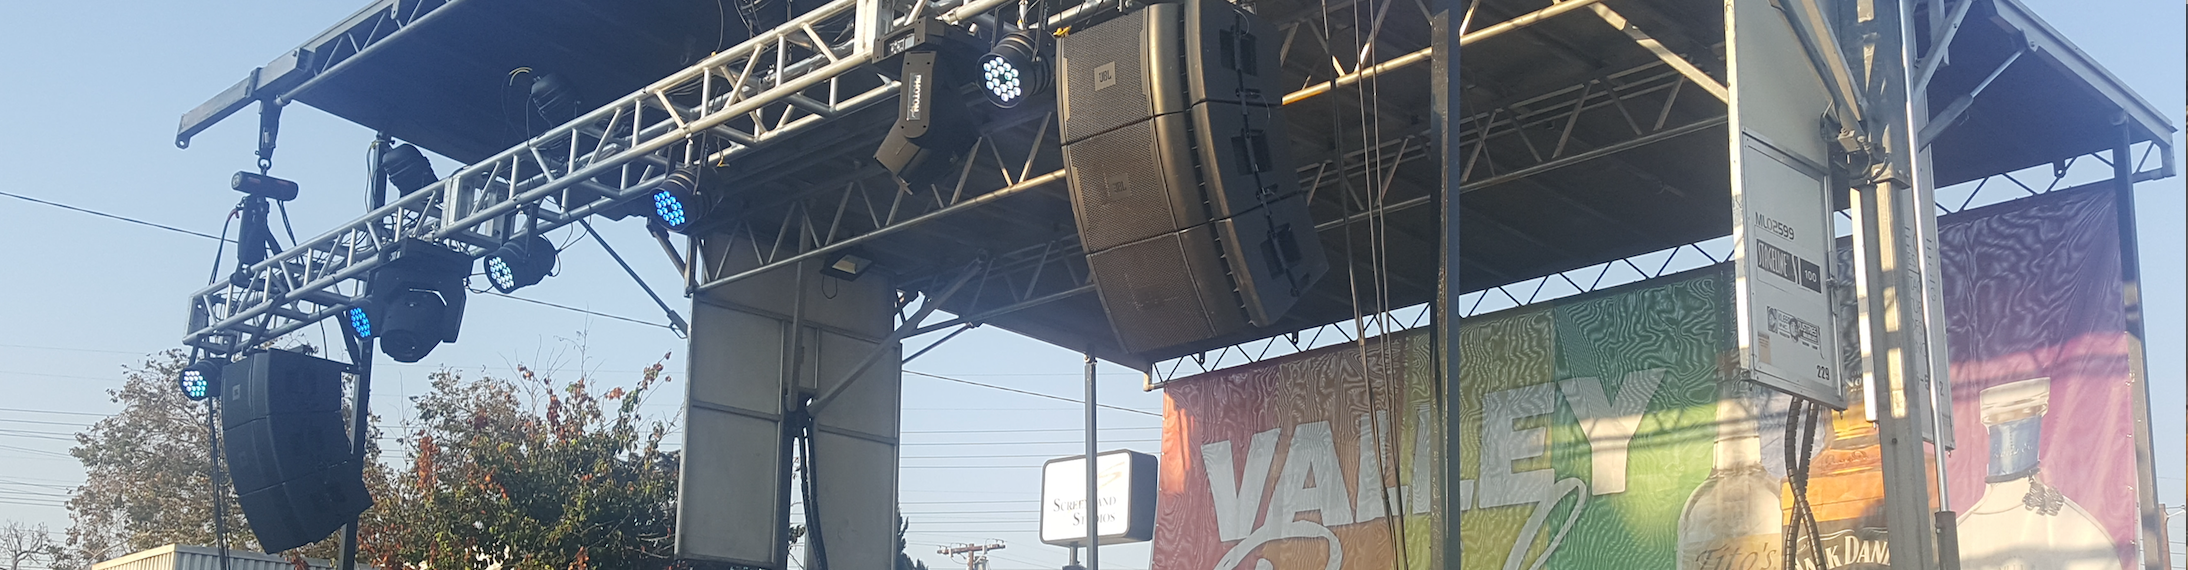 JBL speakers rigged to a truss at an outdoor concert